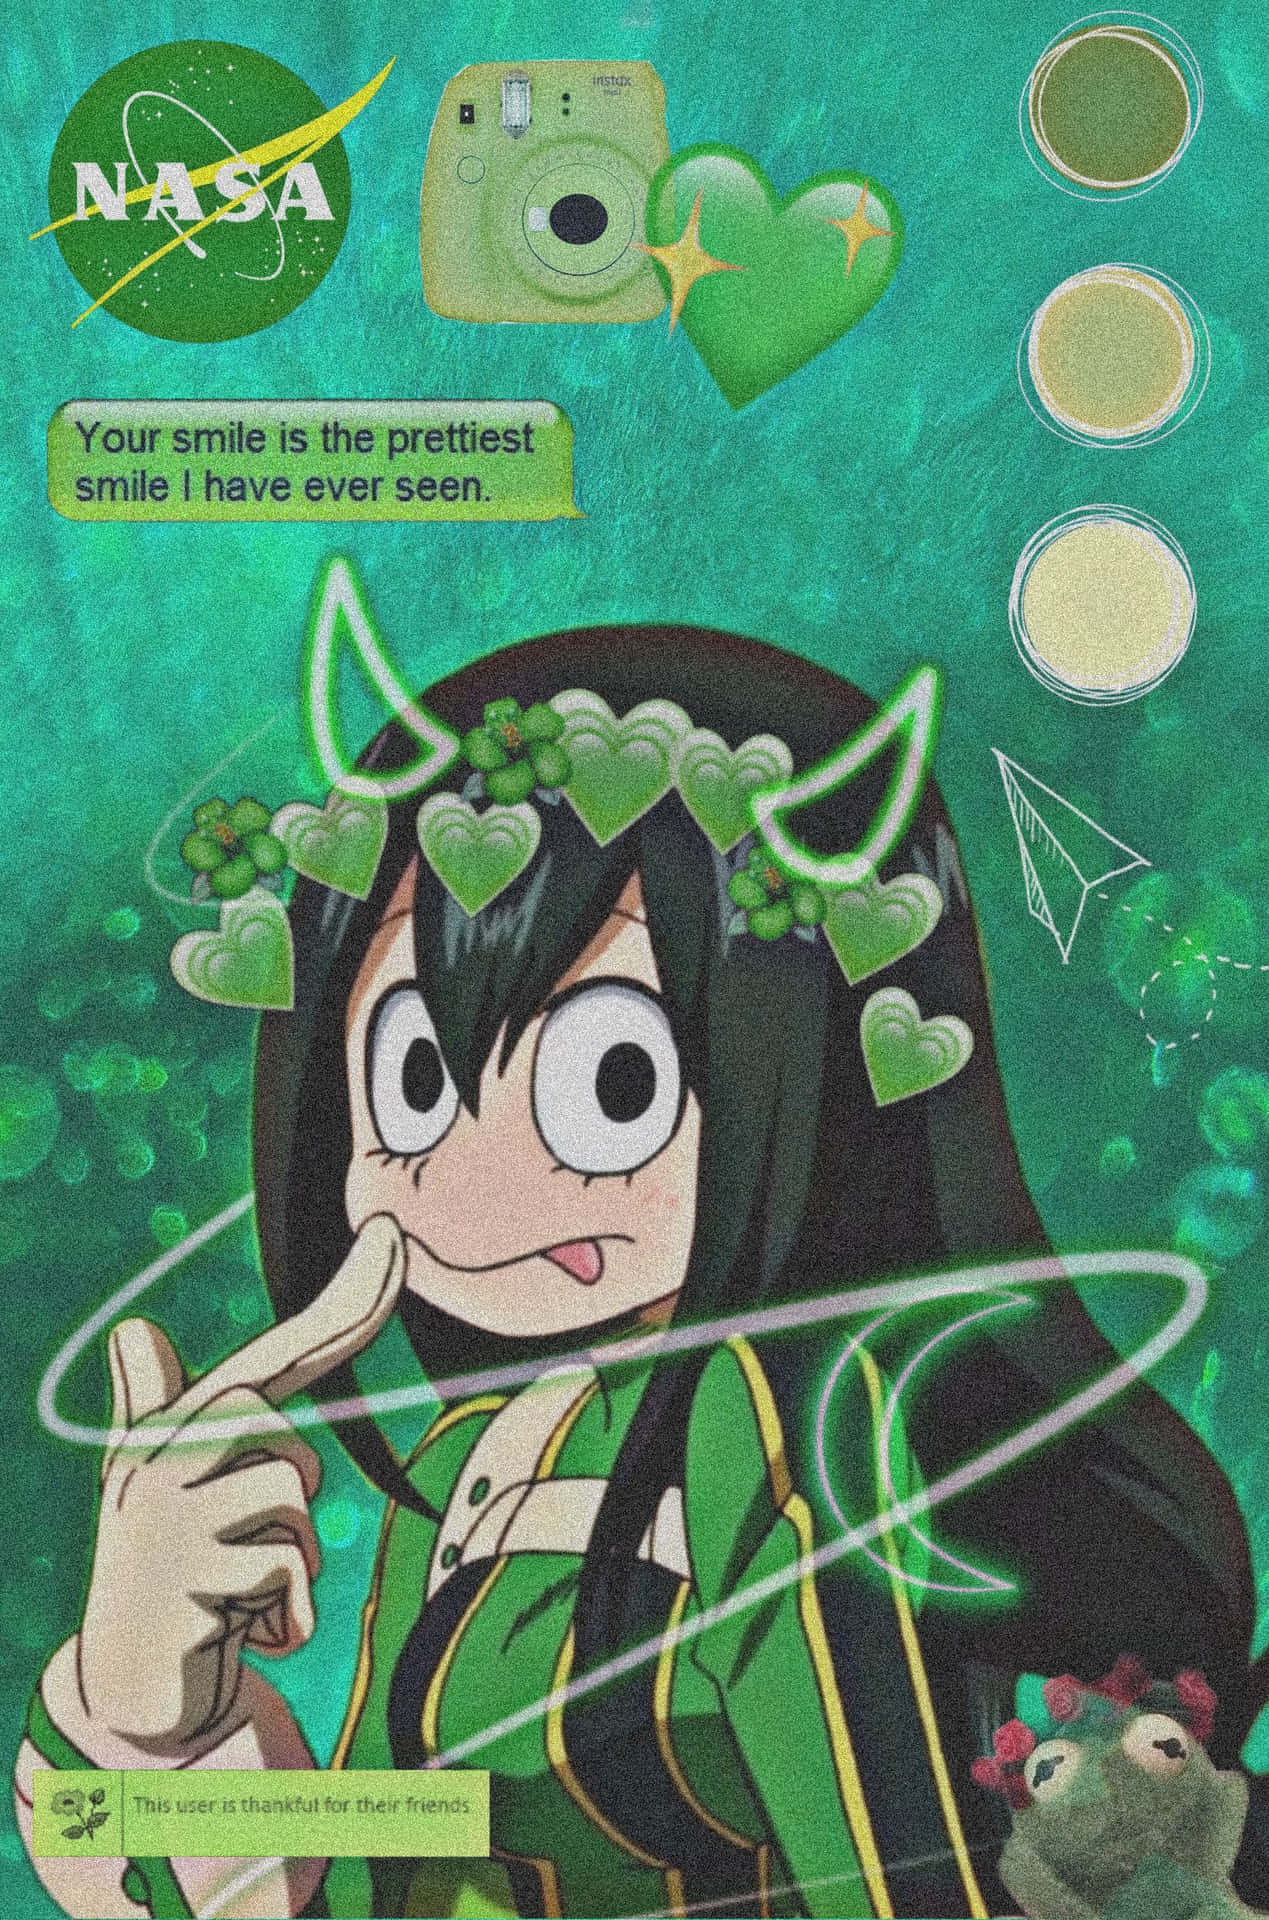 “Froppy bringing you the best in frog-themed content!”